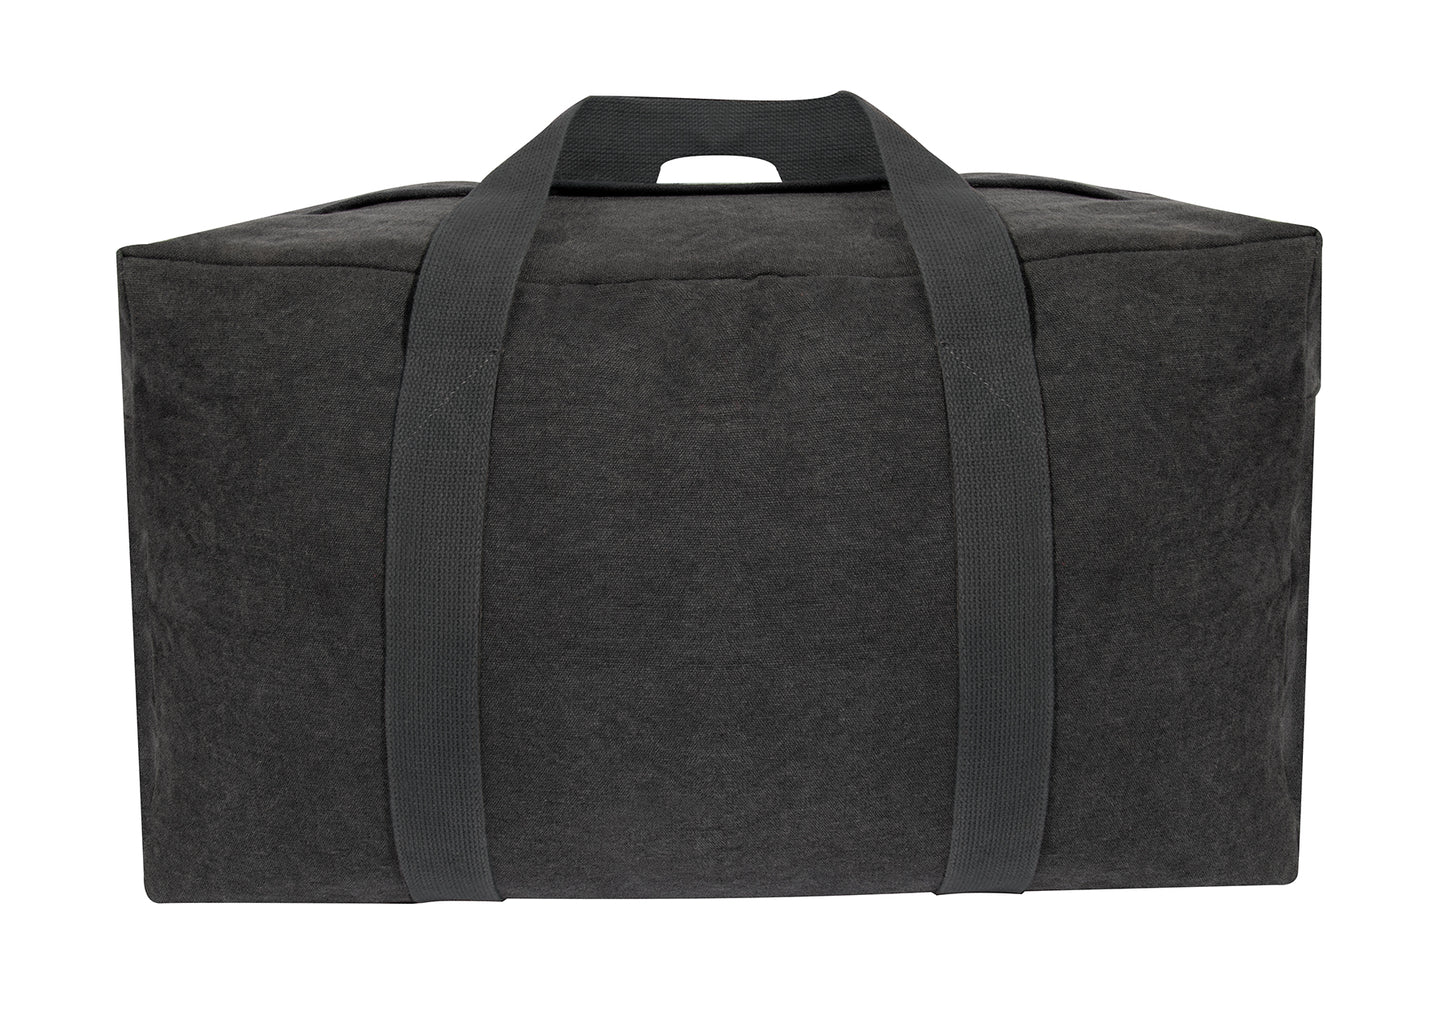 24 Inch Heavyweight Canvas Gear Bag - Can use for Parachute Duffle Carry